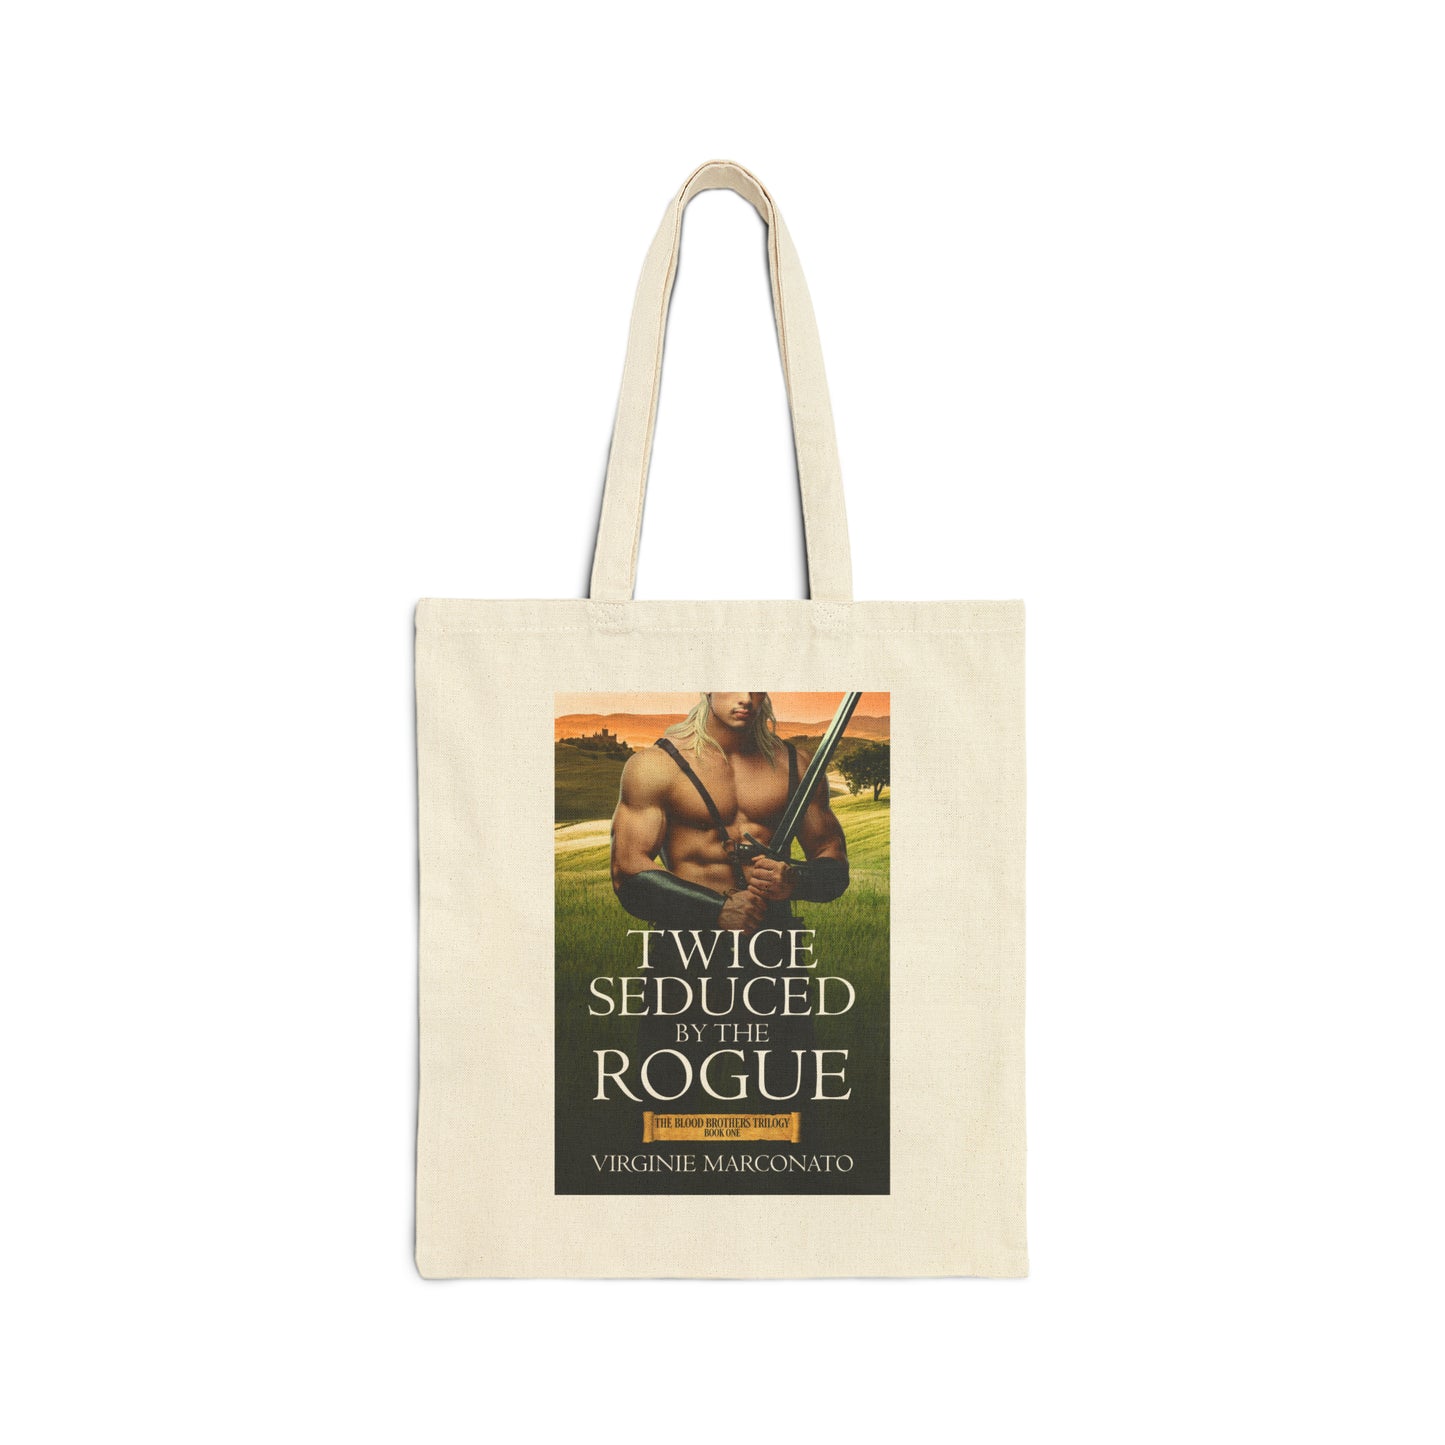 Twice Seduced by the Rogue - Cotton Canvas Tote Bag